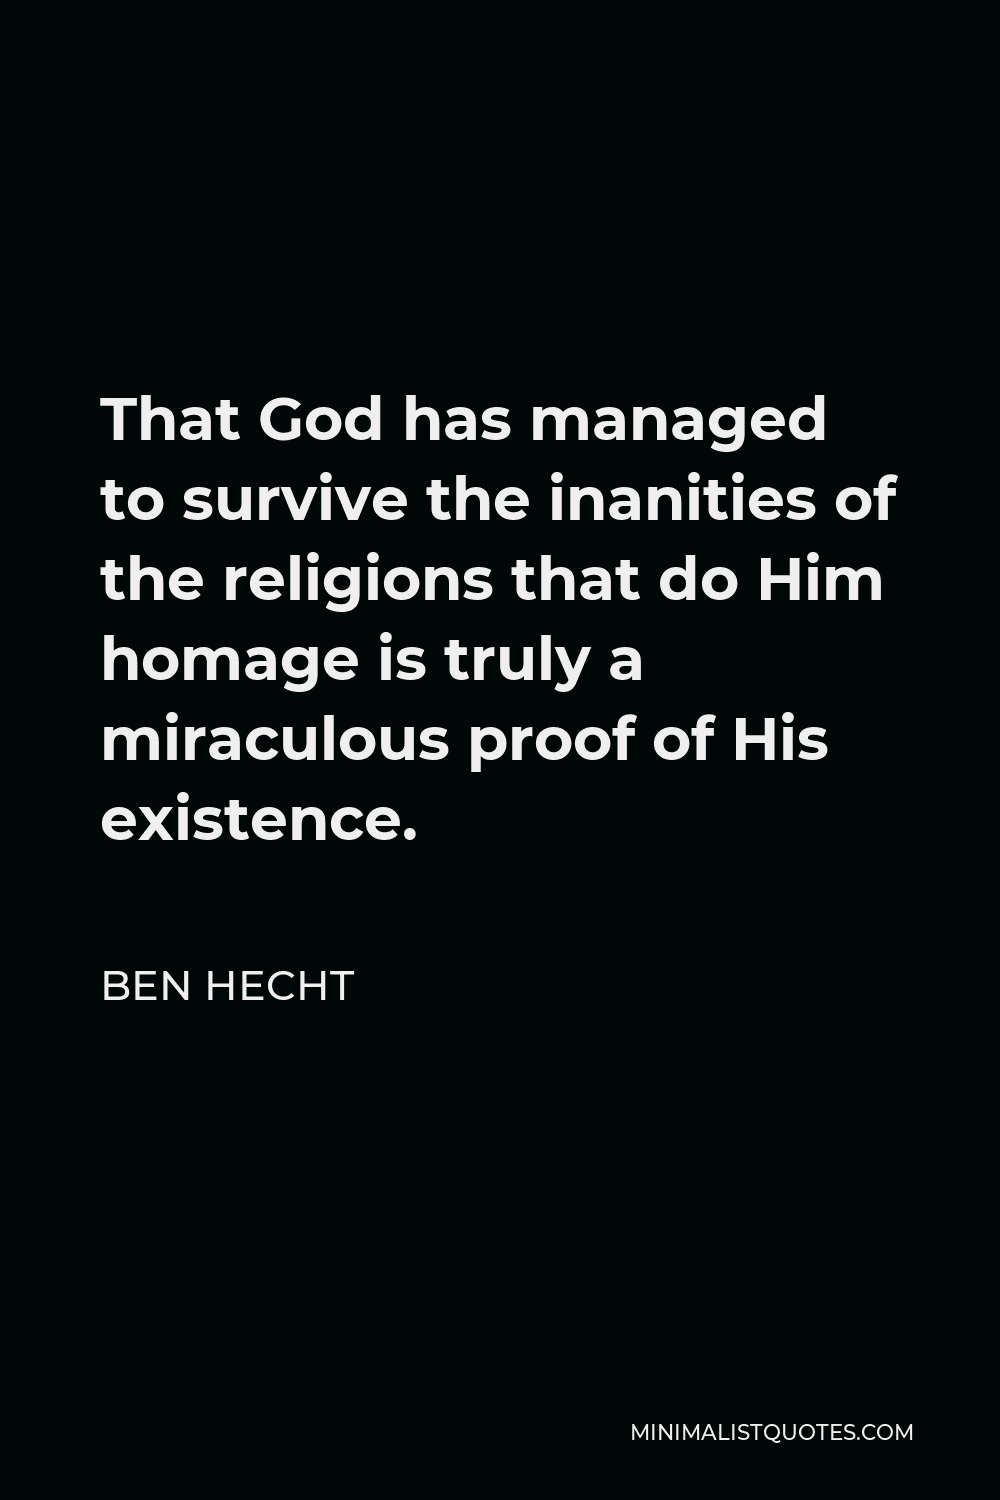 Ben Hecht Quote - That God has managed to survive the inanities of the religions that do Him homage is truly a miraculous proof of His existence.